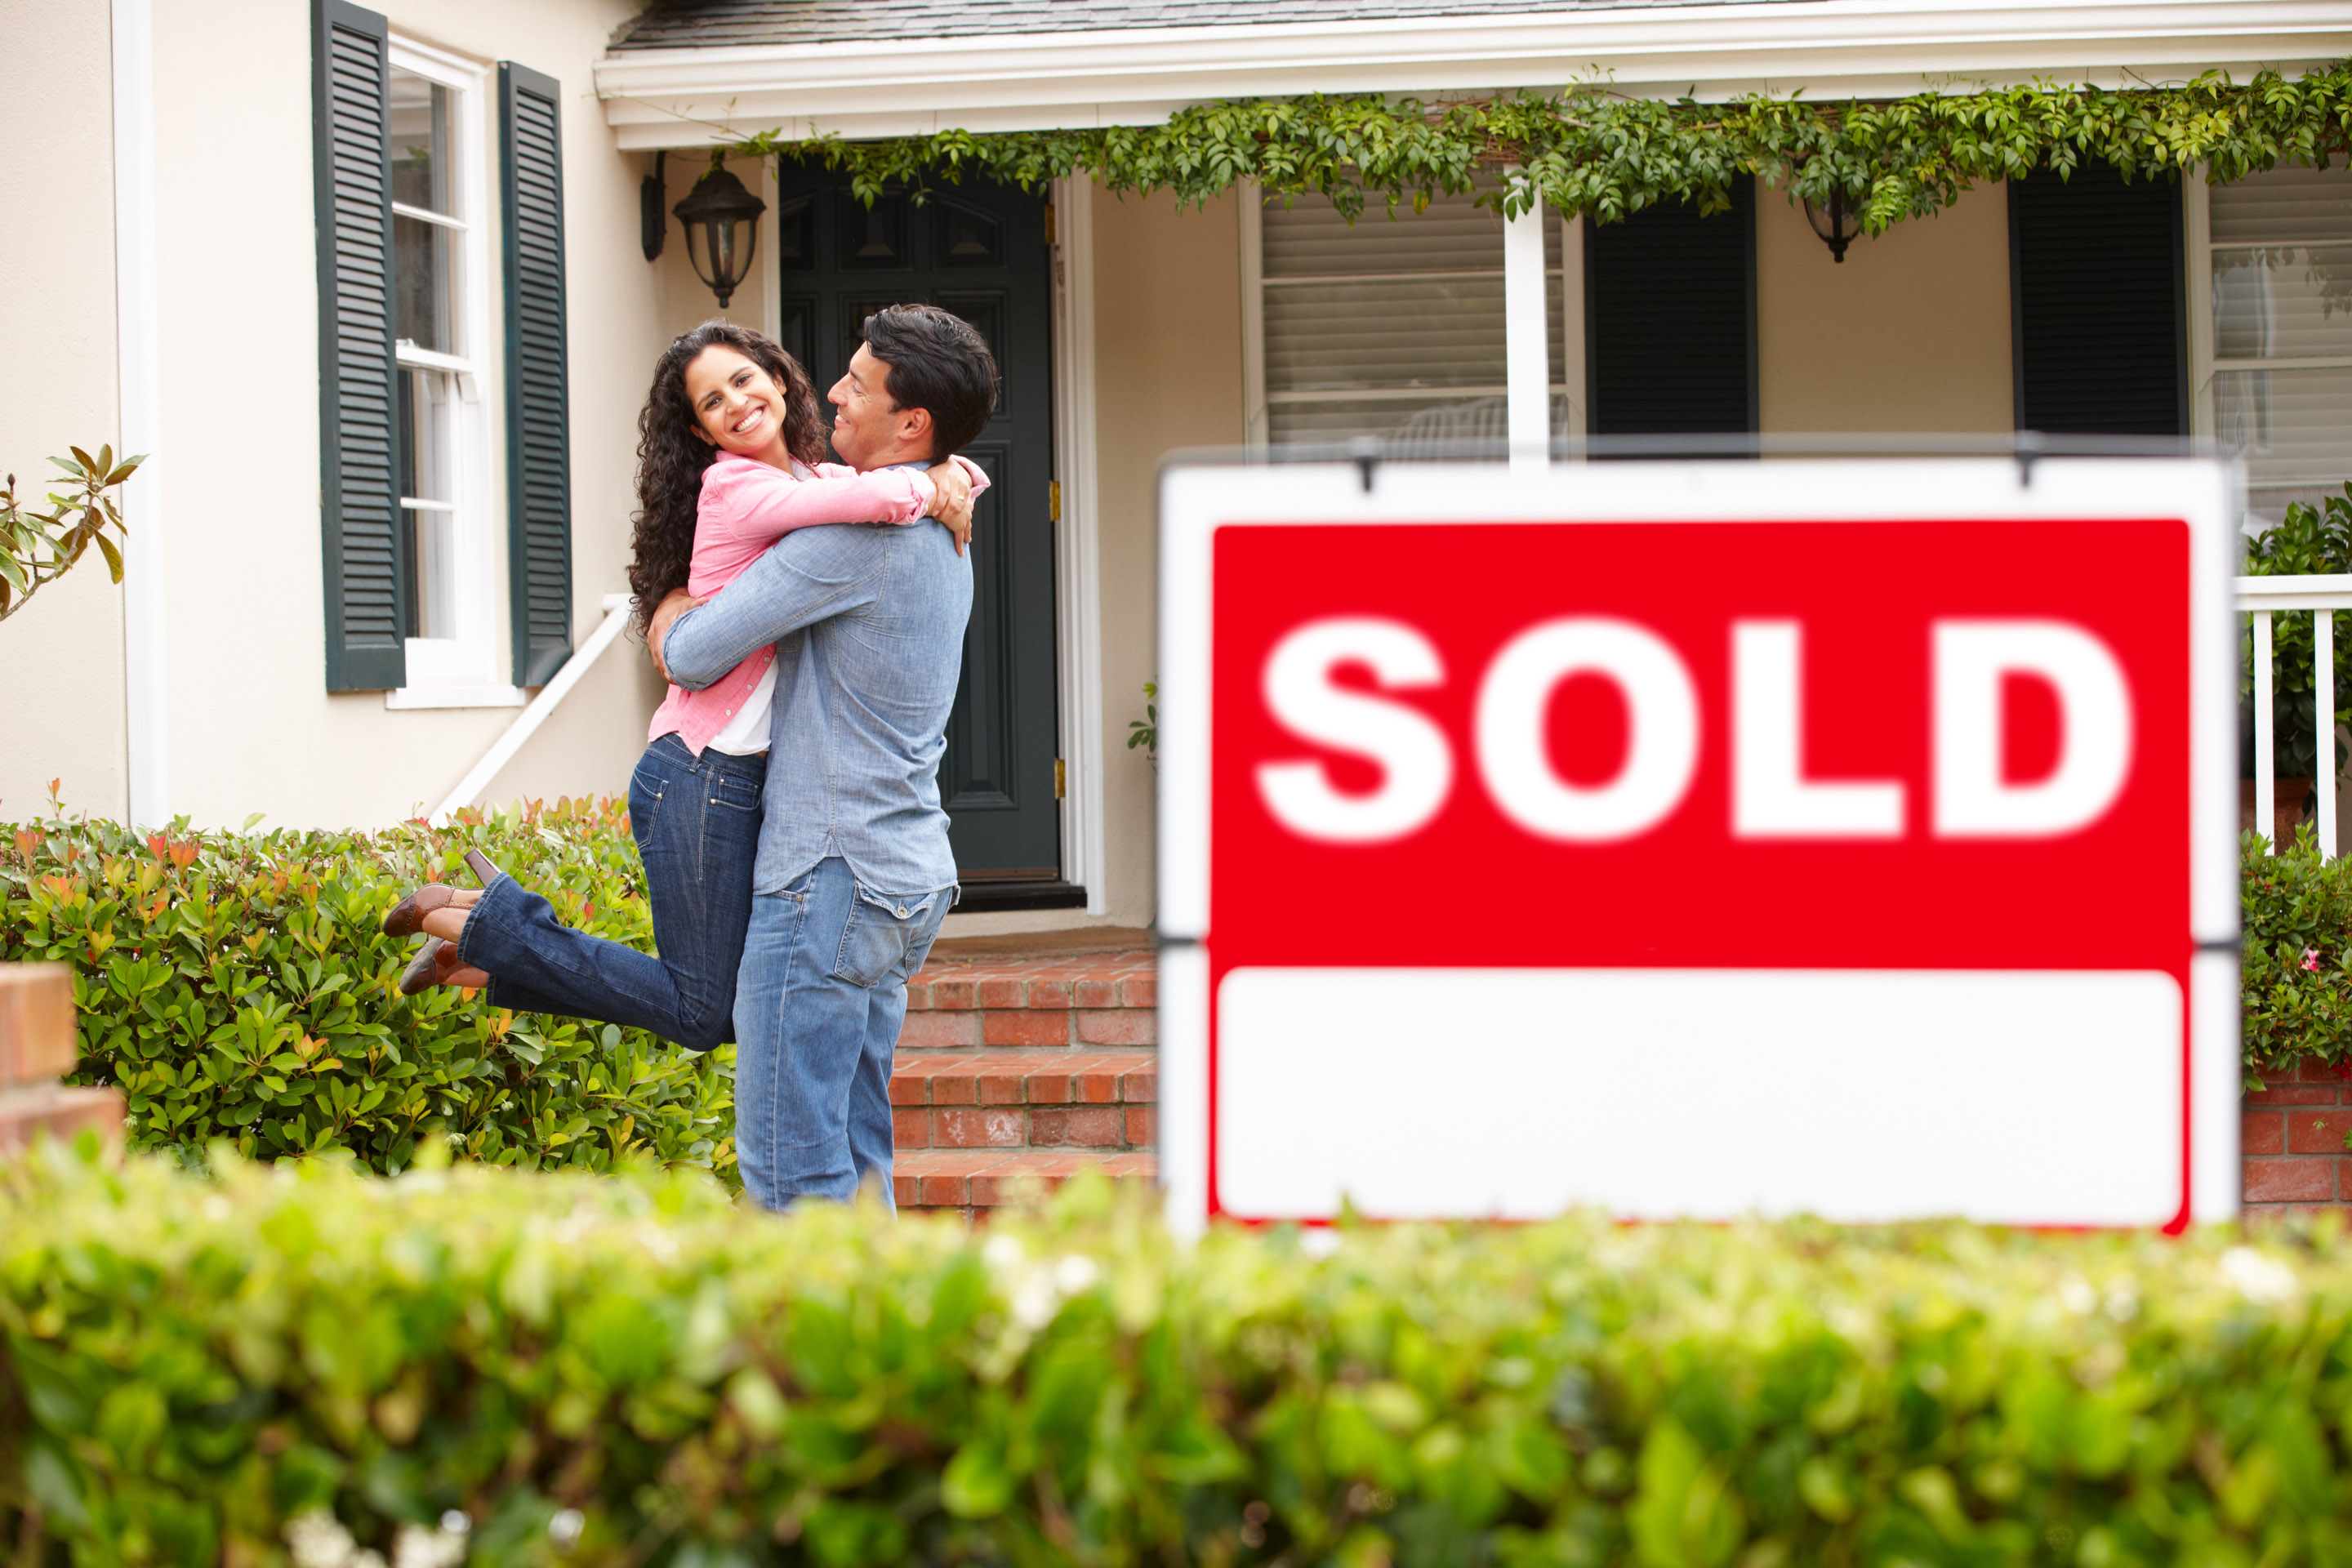 5 Things Every First-Time Home Buyer Needs to Know blog article